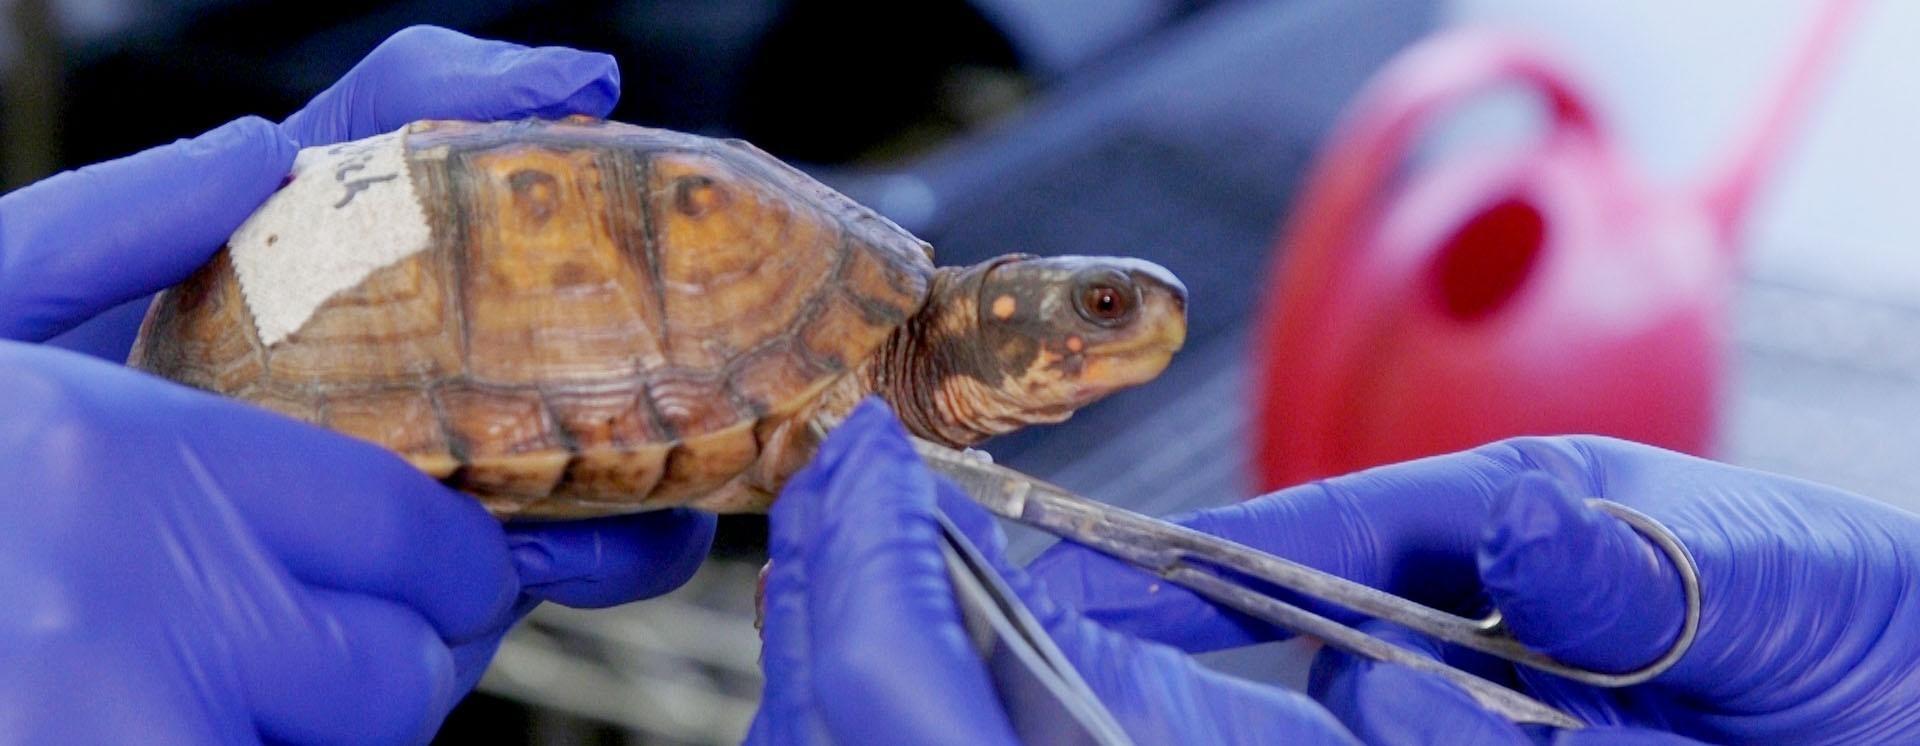 turtle held in gloved hands rescue labeled pulling out tweezers animal